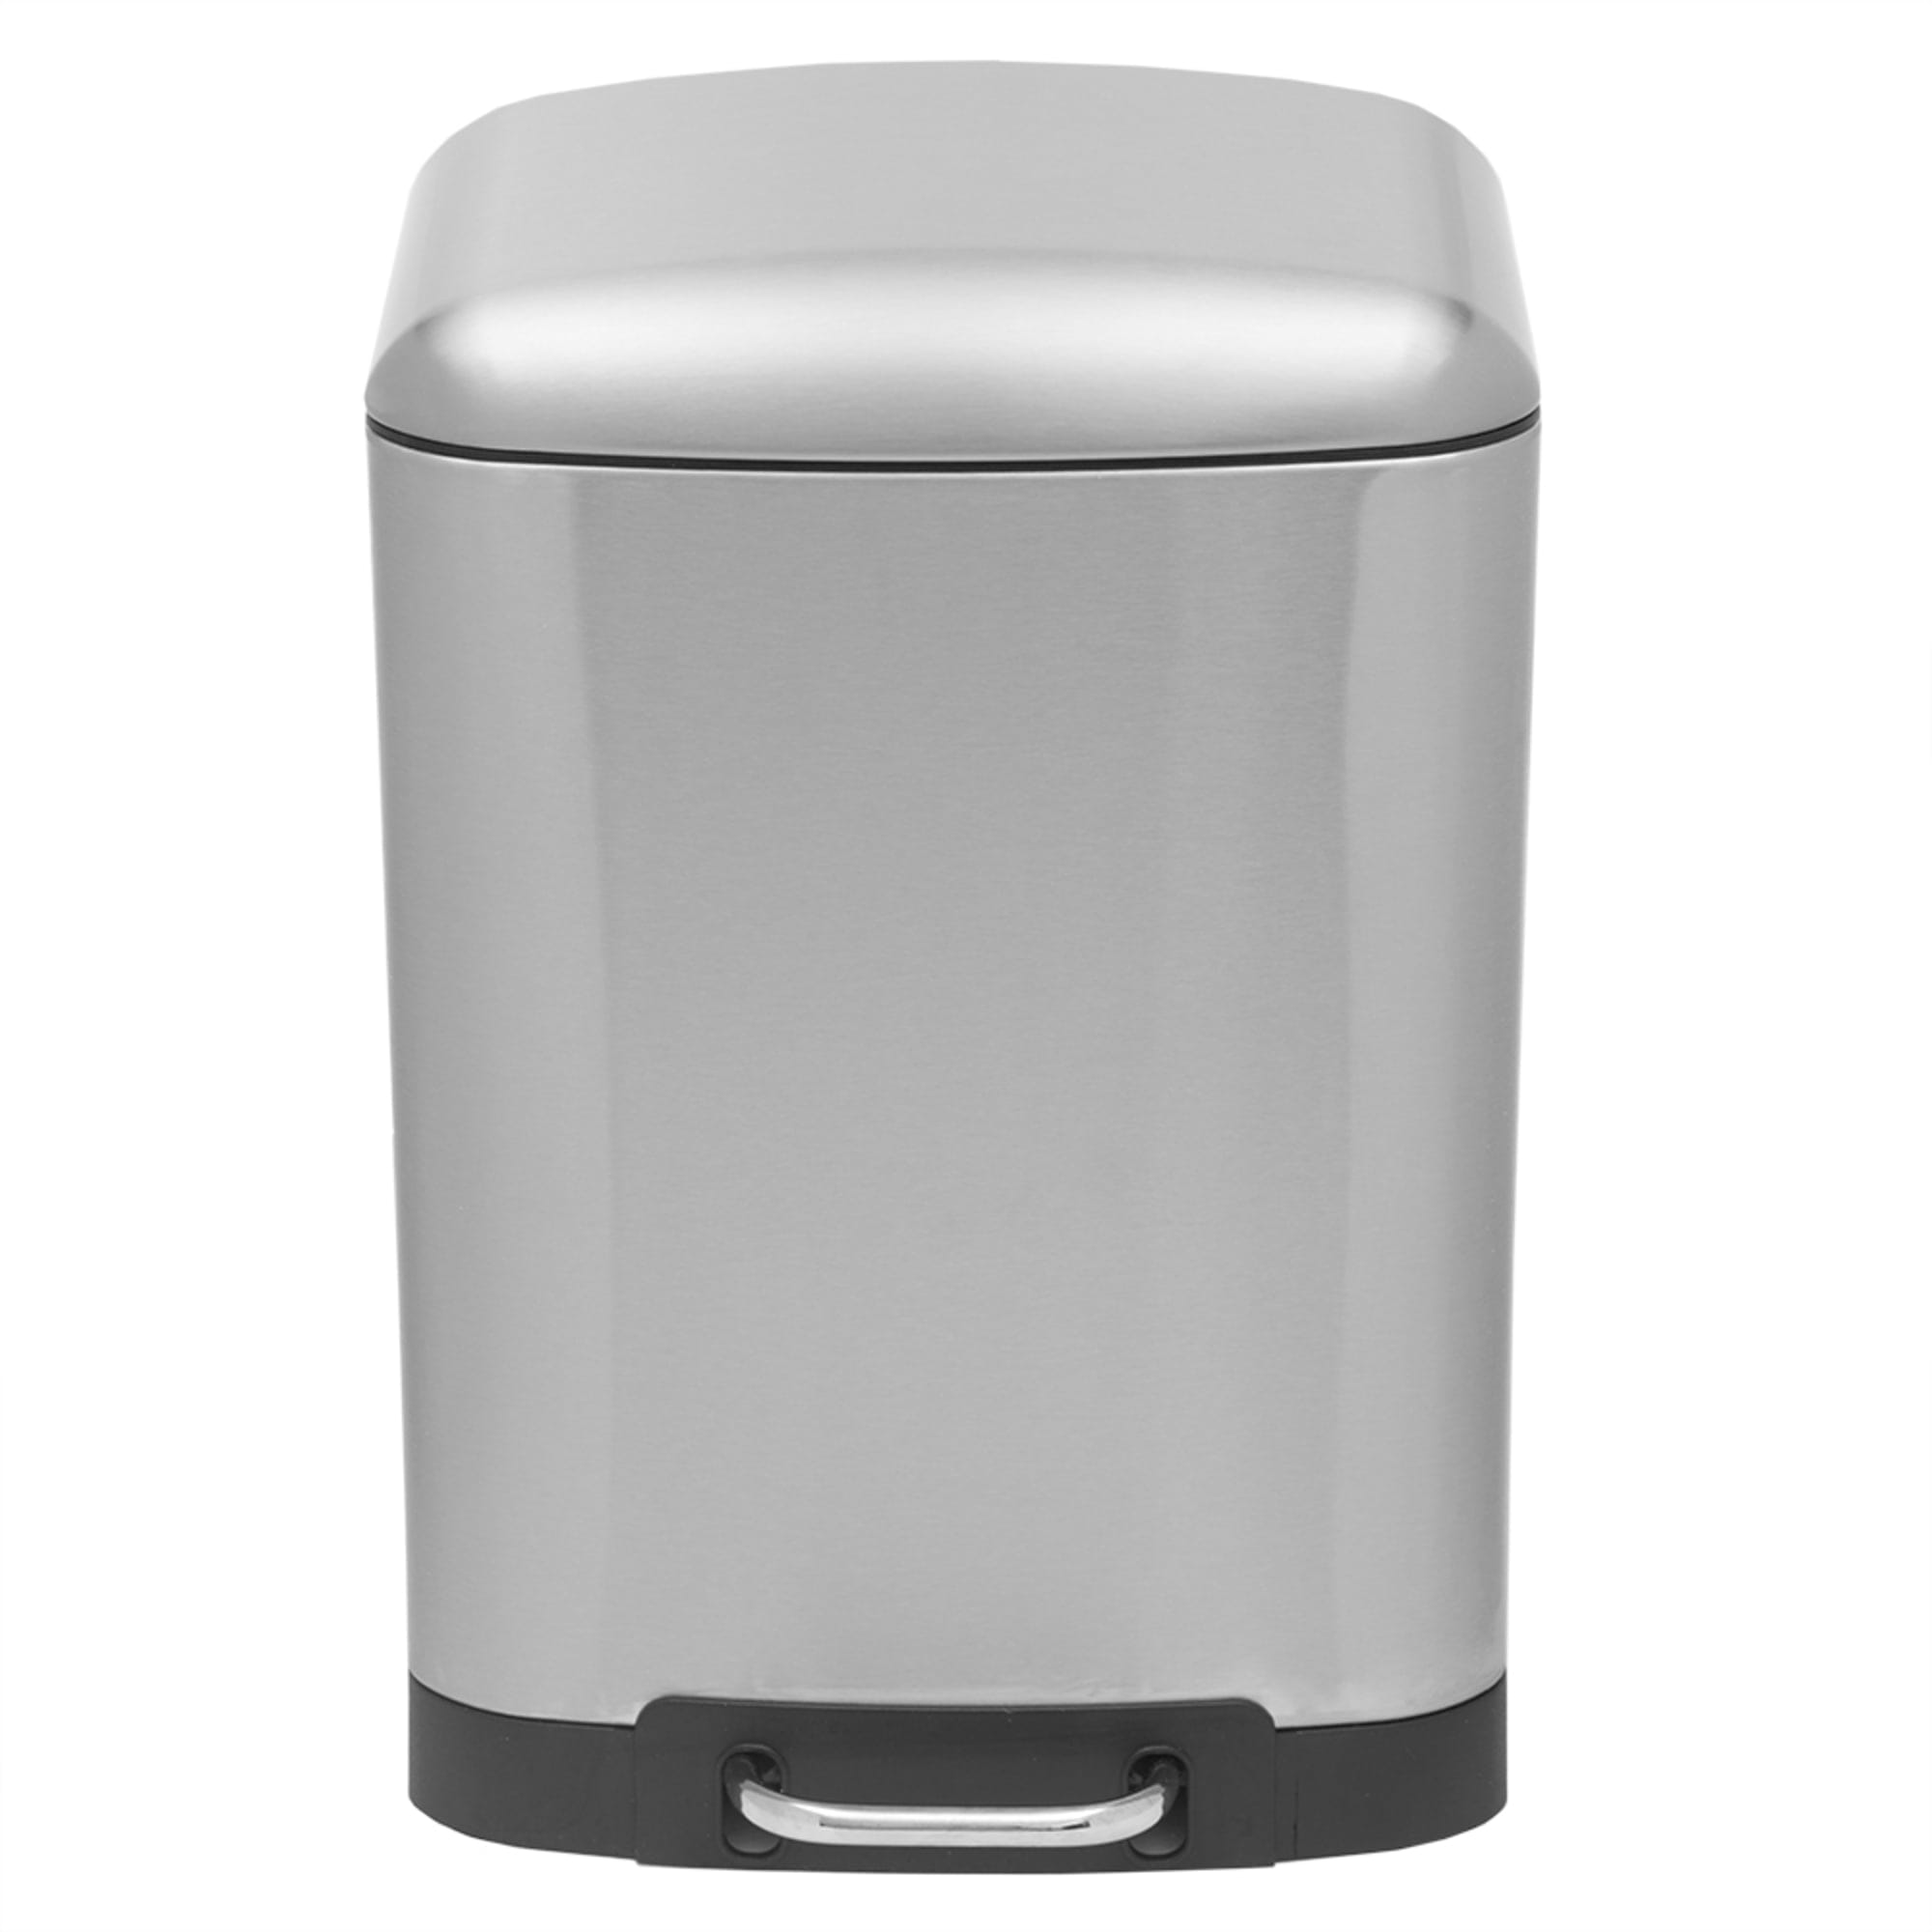 Michael Graves Design Soft Close 12 Liter Step On Stainless Steel Waste Bin, Silver $30 EACH, CASE PACK OF 4